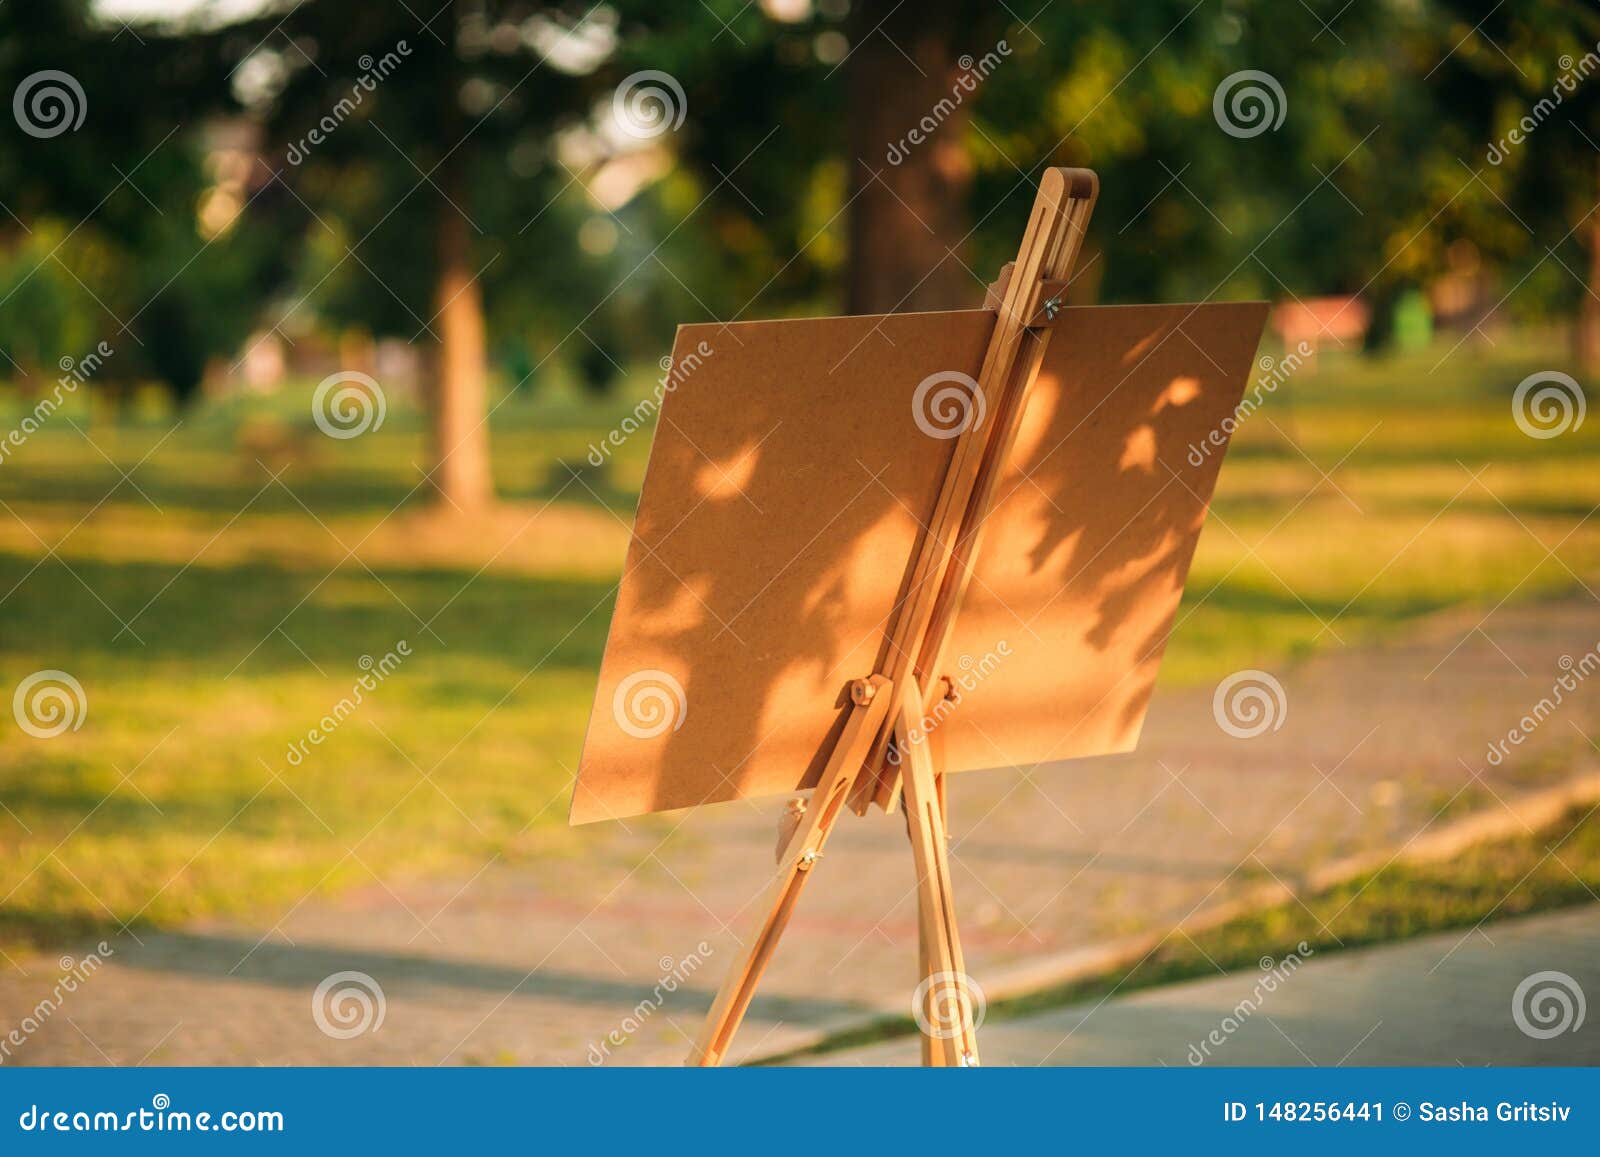 Back View of Picture on Easel Stand in the Park Stock Image - Image of  nature, palette: 148256441